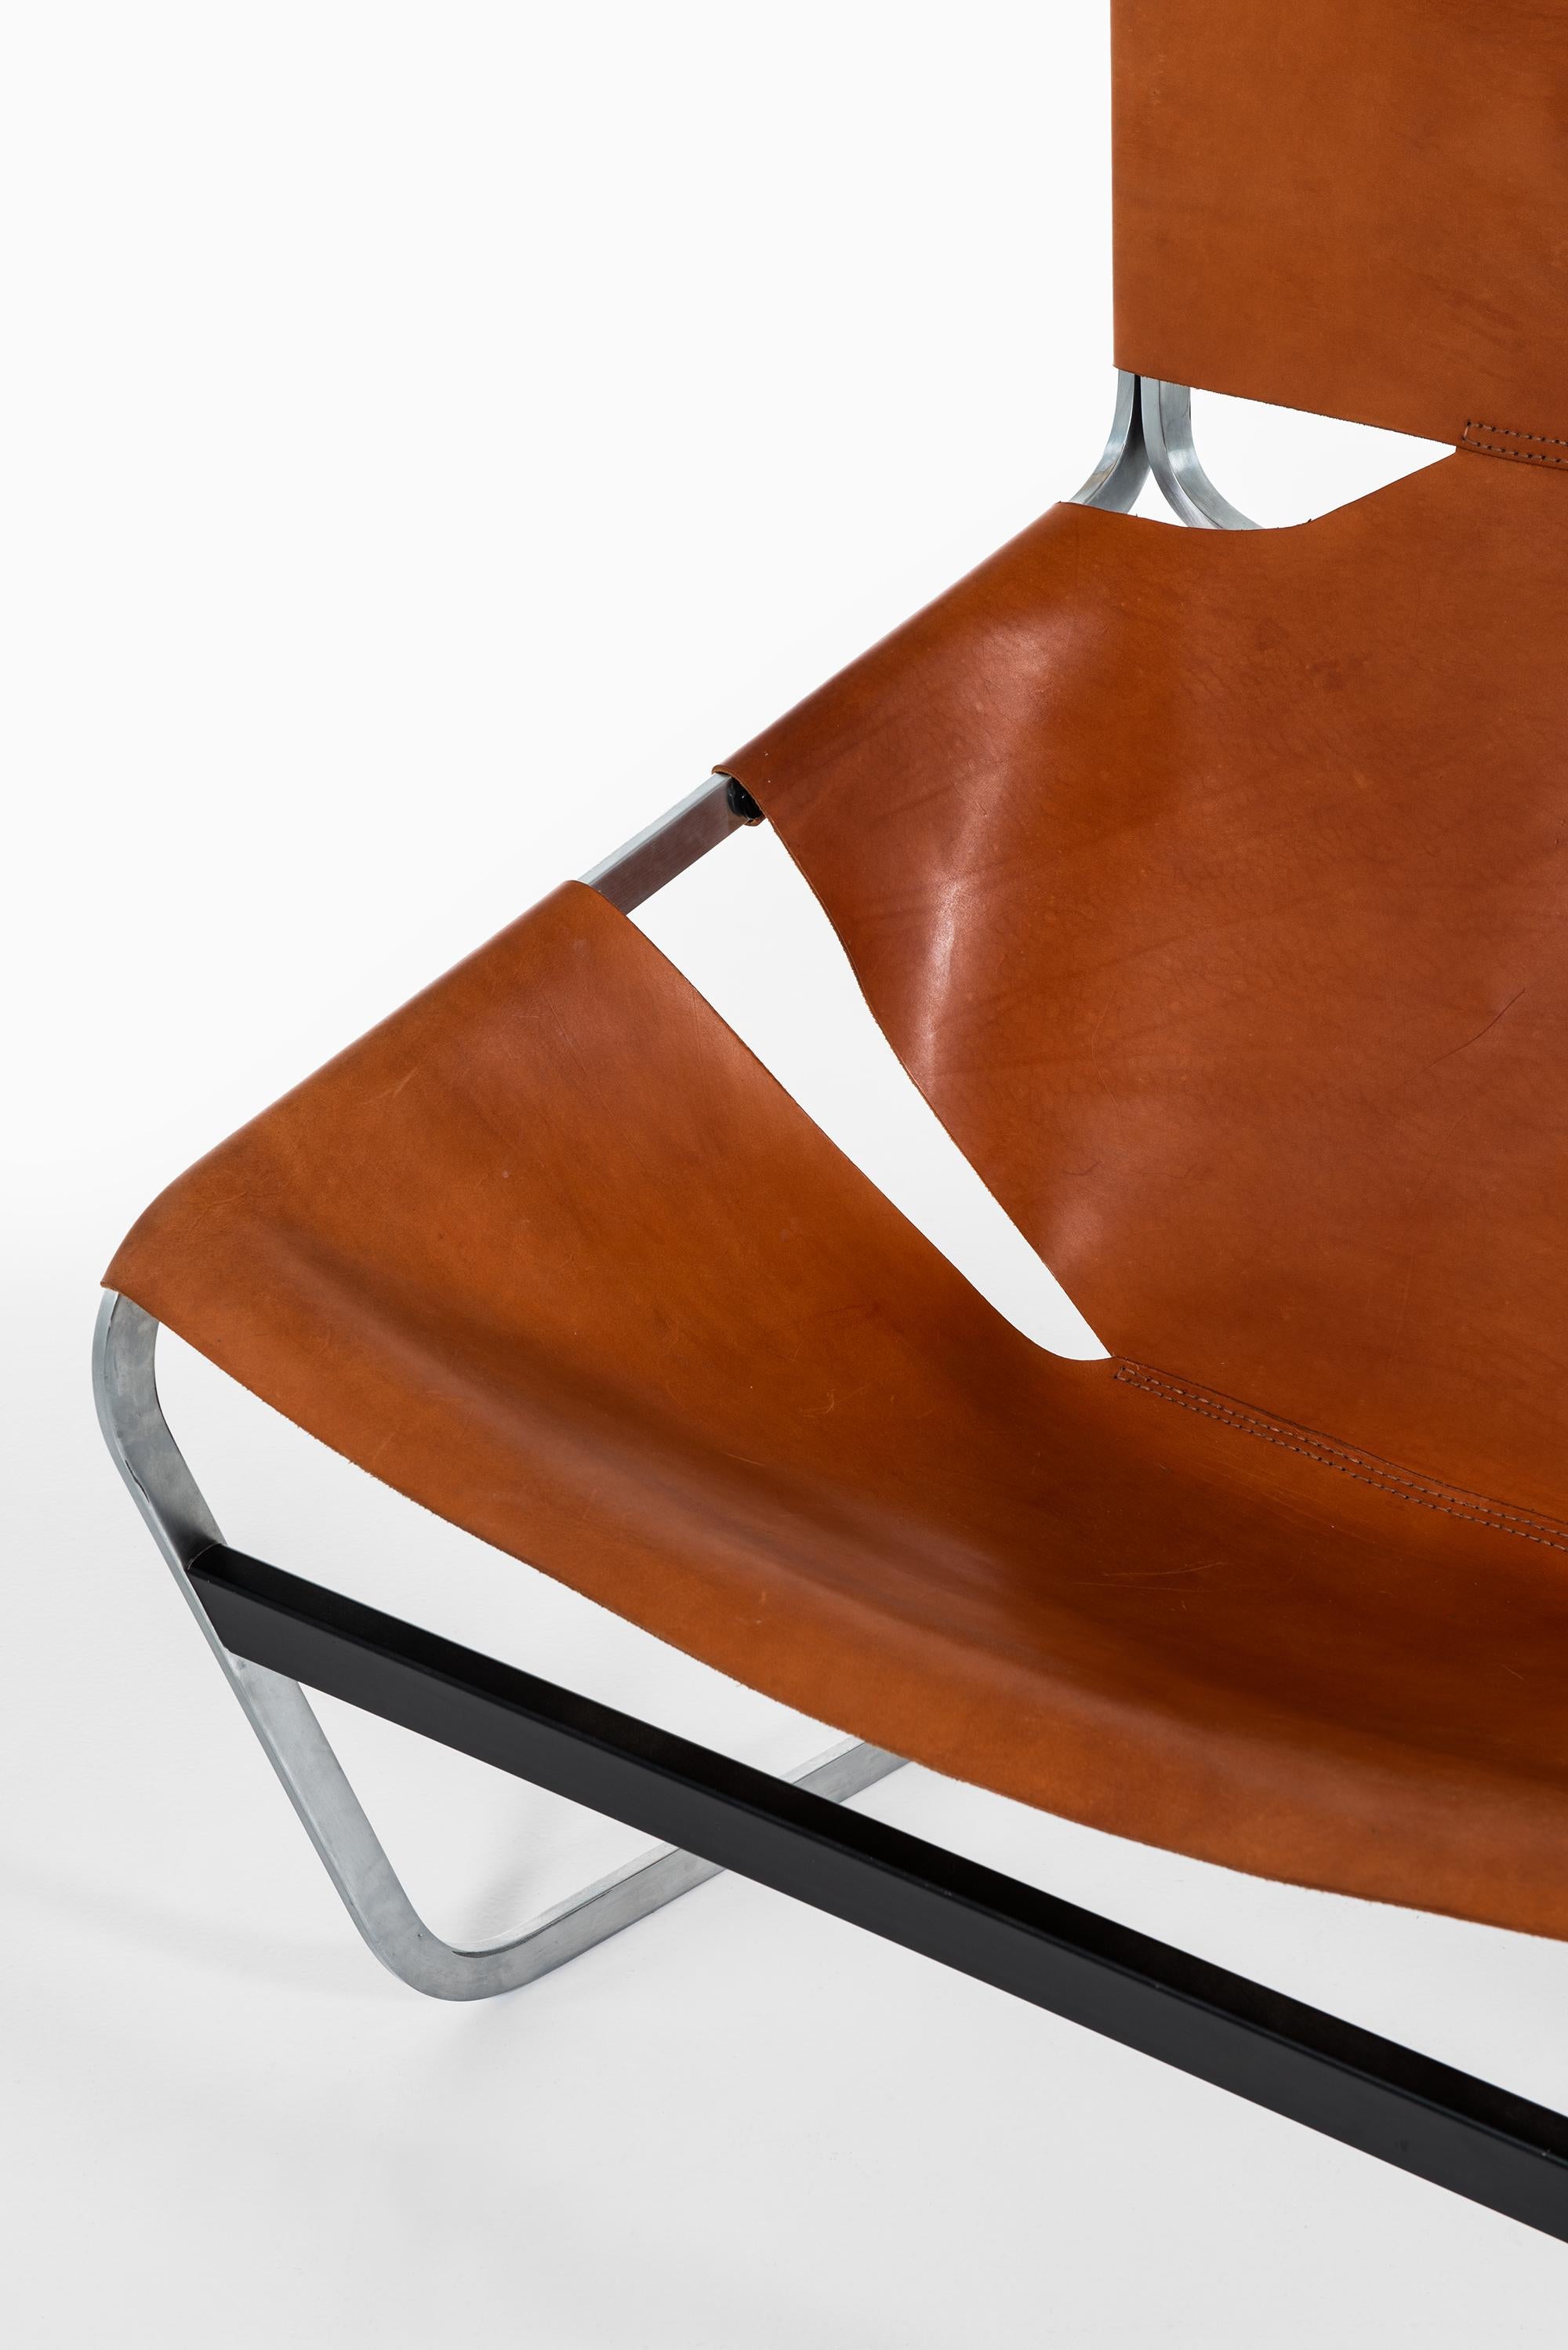 Mid-20th Century Pierre Paulin Easy Chair Model F-444 Produced by Artifort in Netherlands